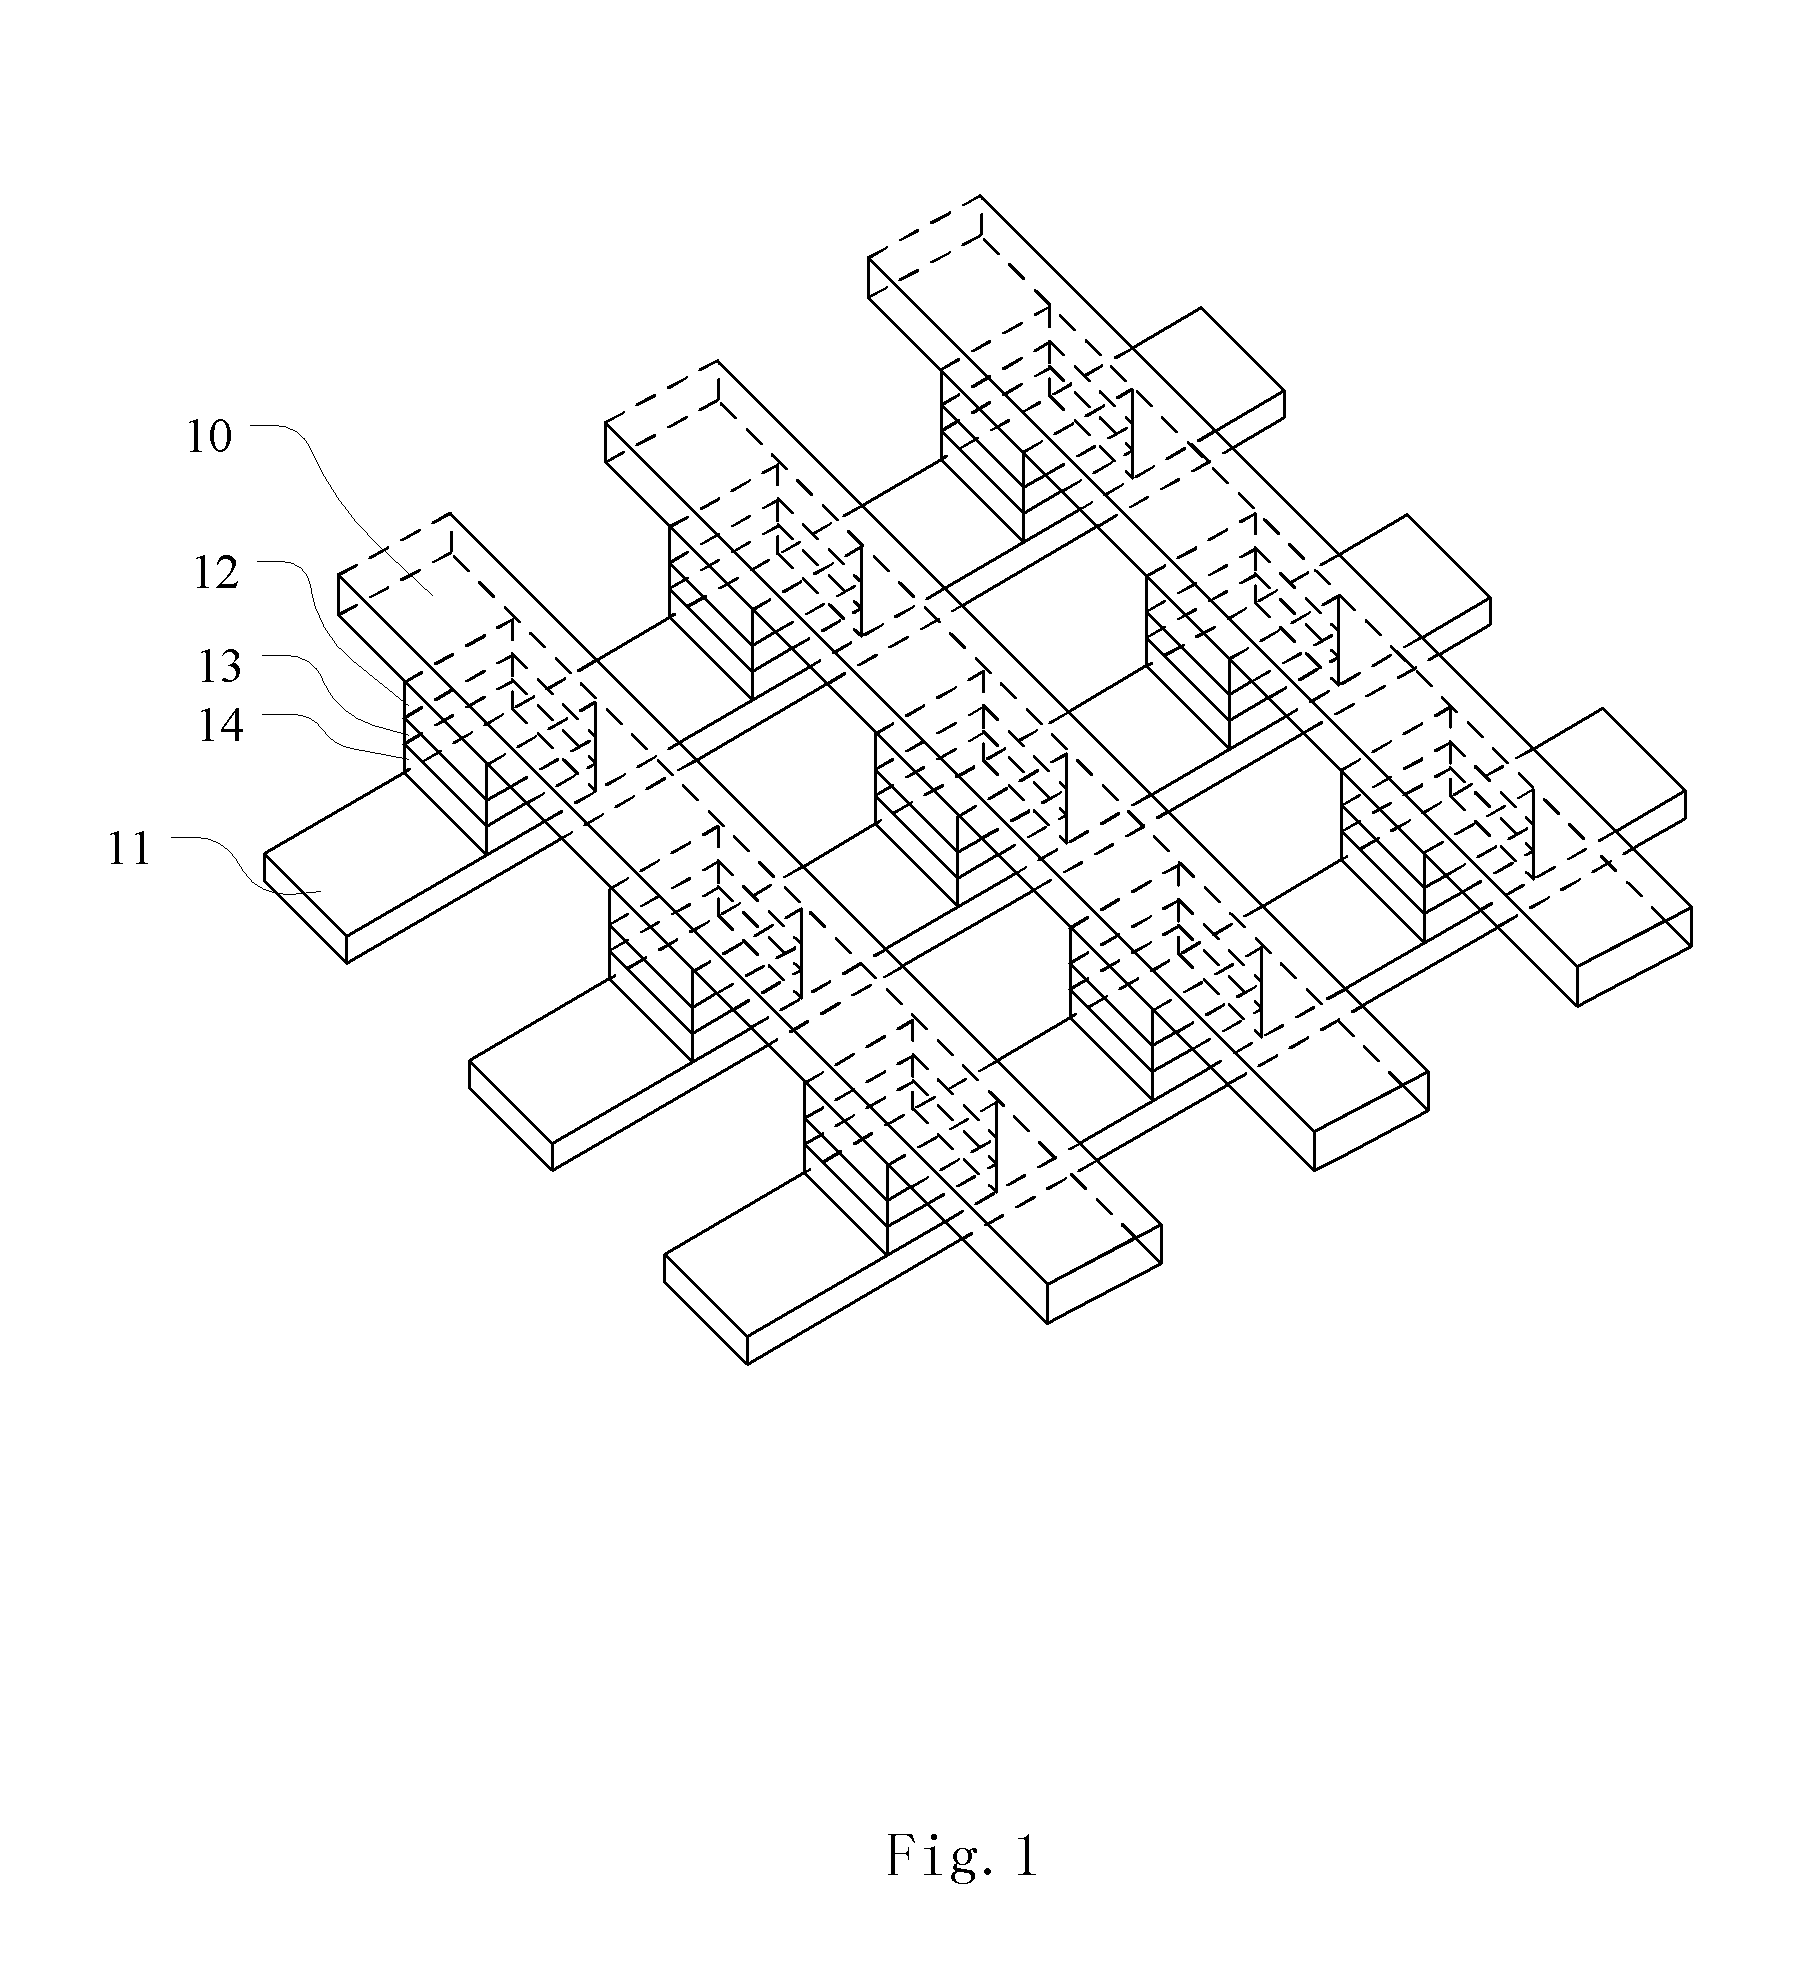 Resistive radom access memory device, method for manufacturing the same, and method for operating the same